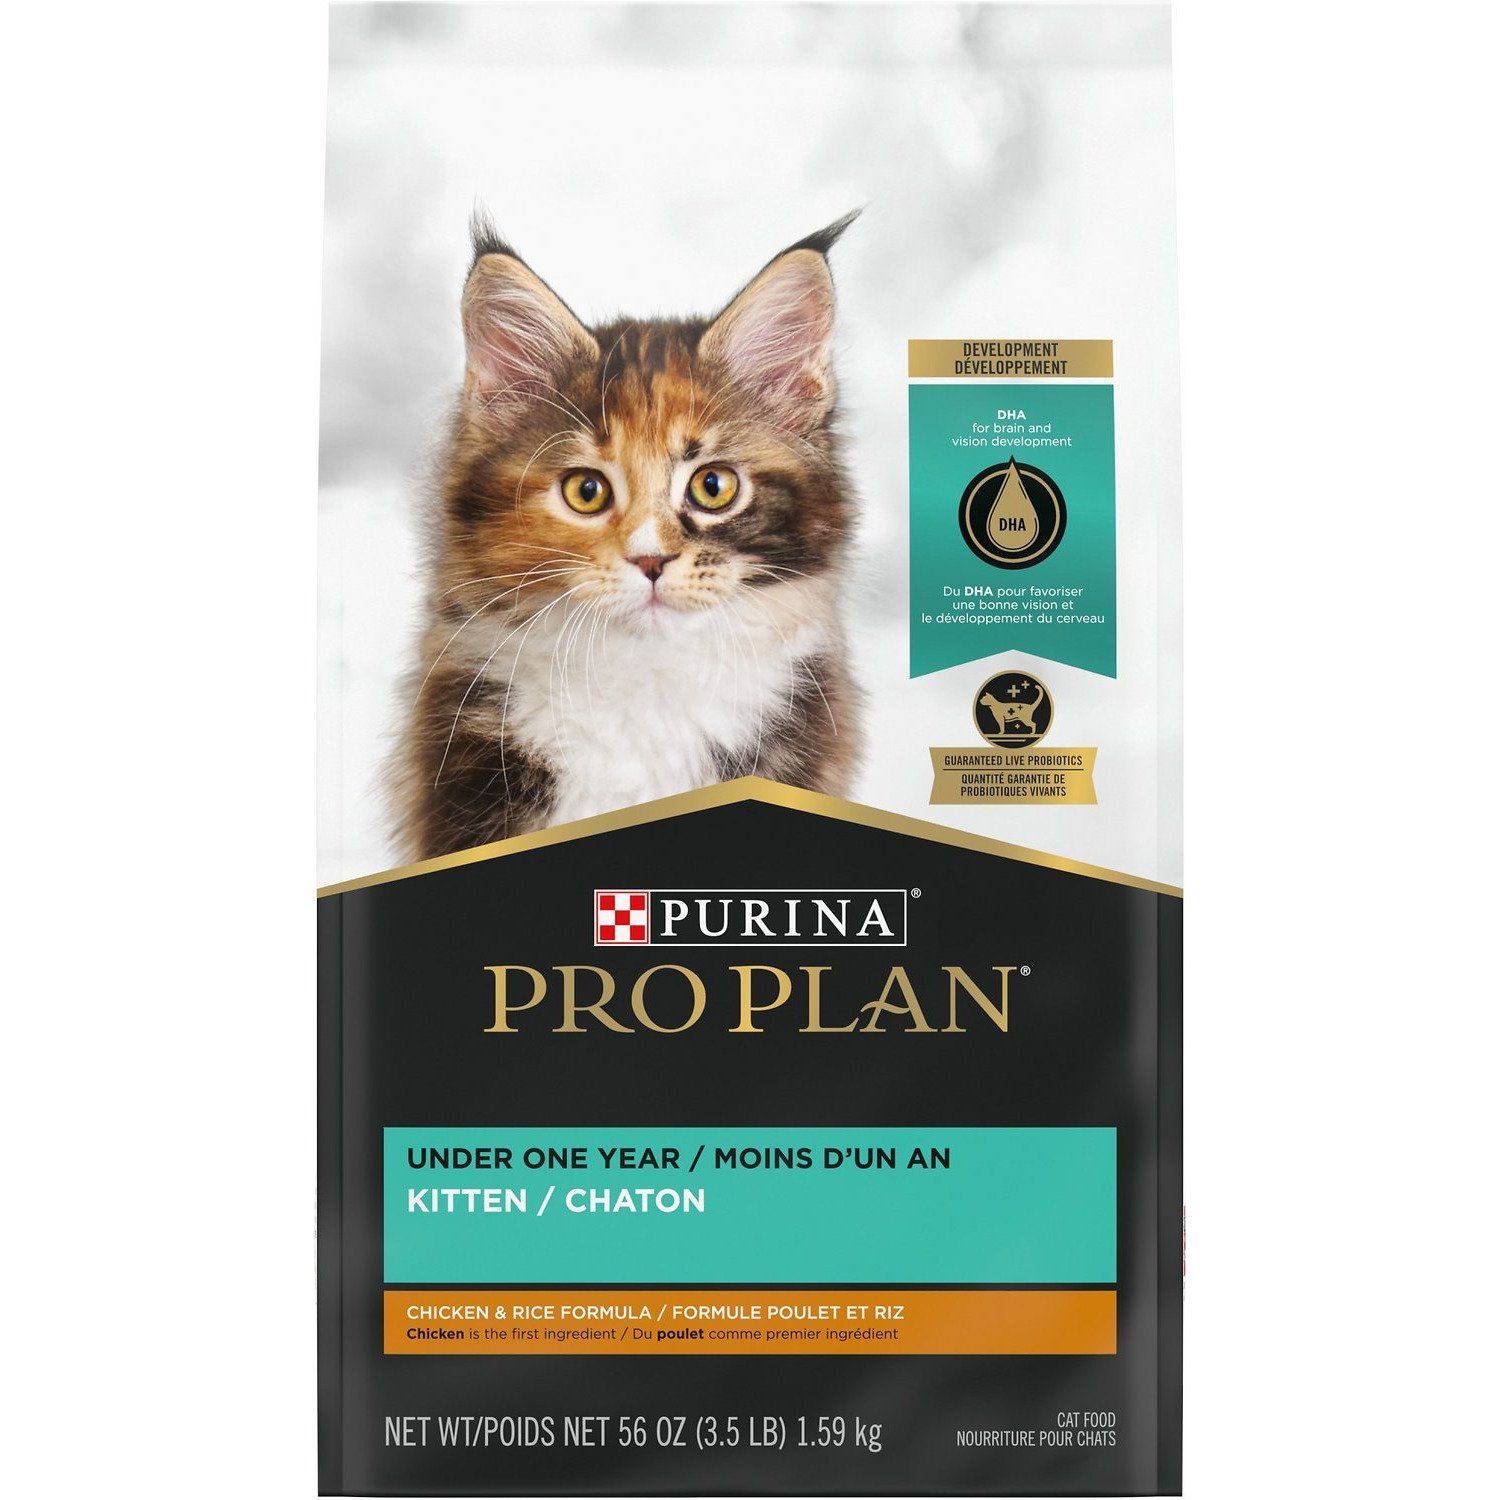 Purina Pro Plan With Probiotics High Protein Dry Kitten Food Chicken & Rice Formula 1.59 Kg Cat Food 1.59 Kg | PetMax Canada